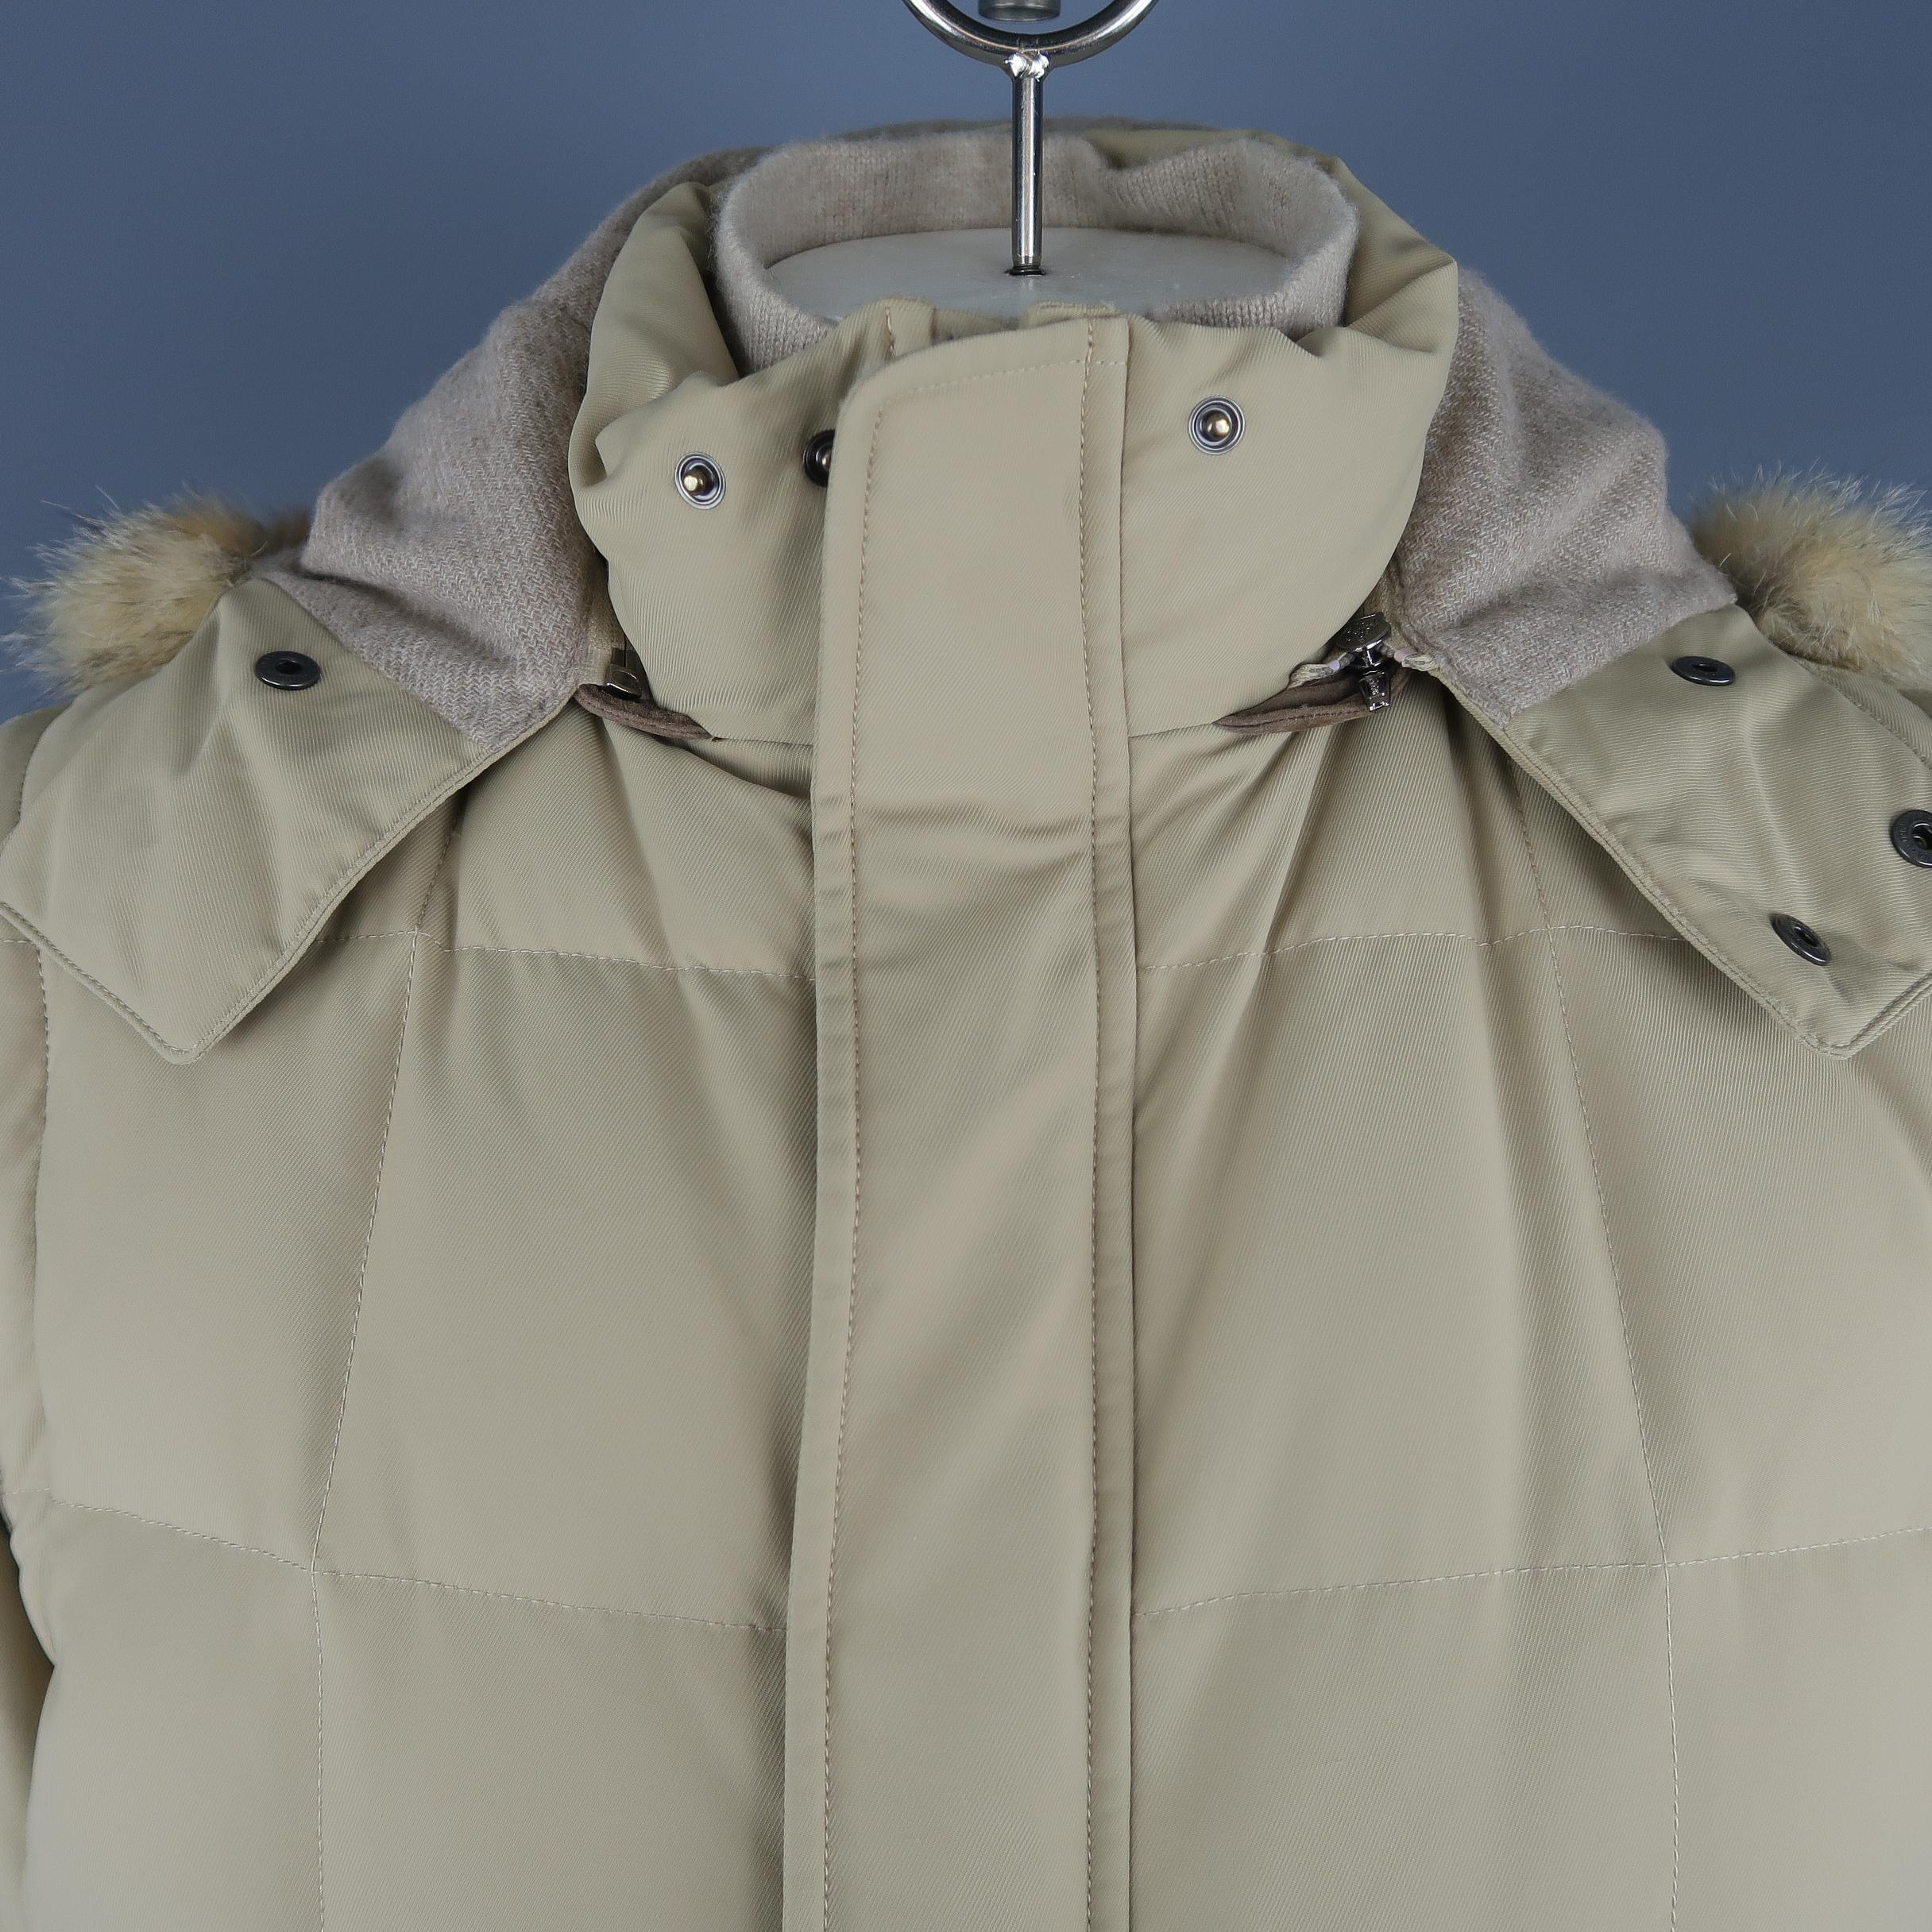 LORO PIANA puff jacket comes in khaki down filled quilted twill with slanted pockets, double zip snap placket front, high collar with internal cashmere removable liner, zip off sleeves, and detachable cashmere lined fox fur trimmed hood. Made in